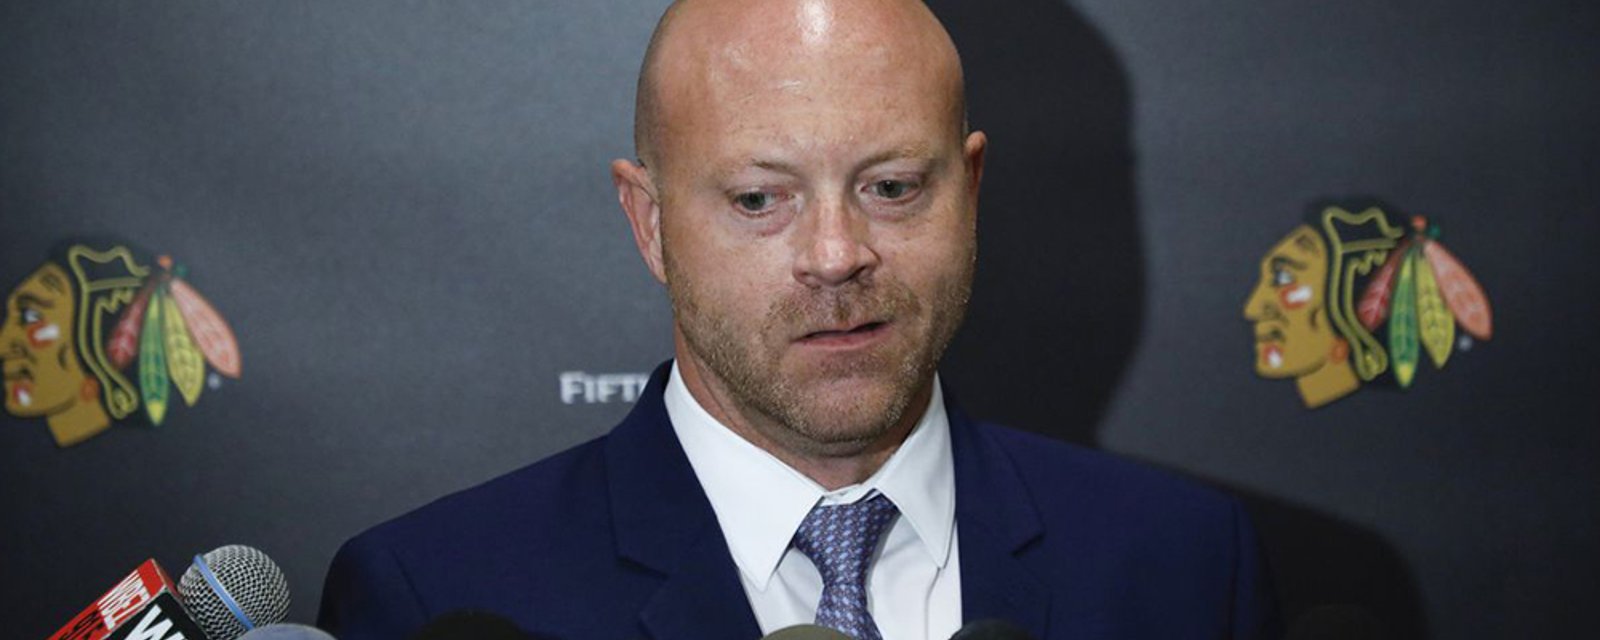 Blackhawks GM Stan Bowman's recent comments likely to draw ire from sexual abuse survivor advocacy group 